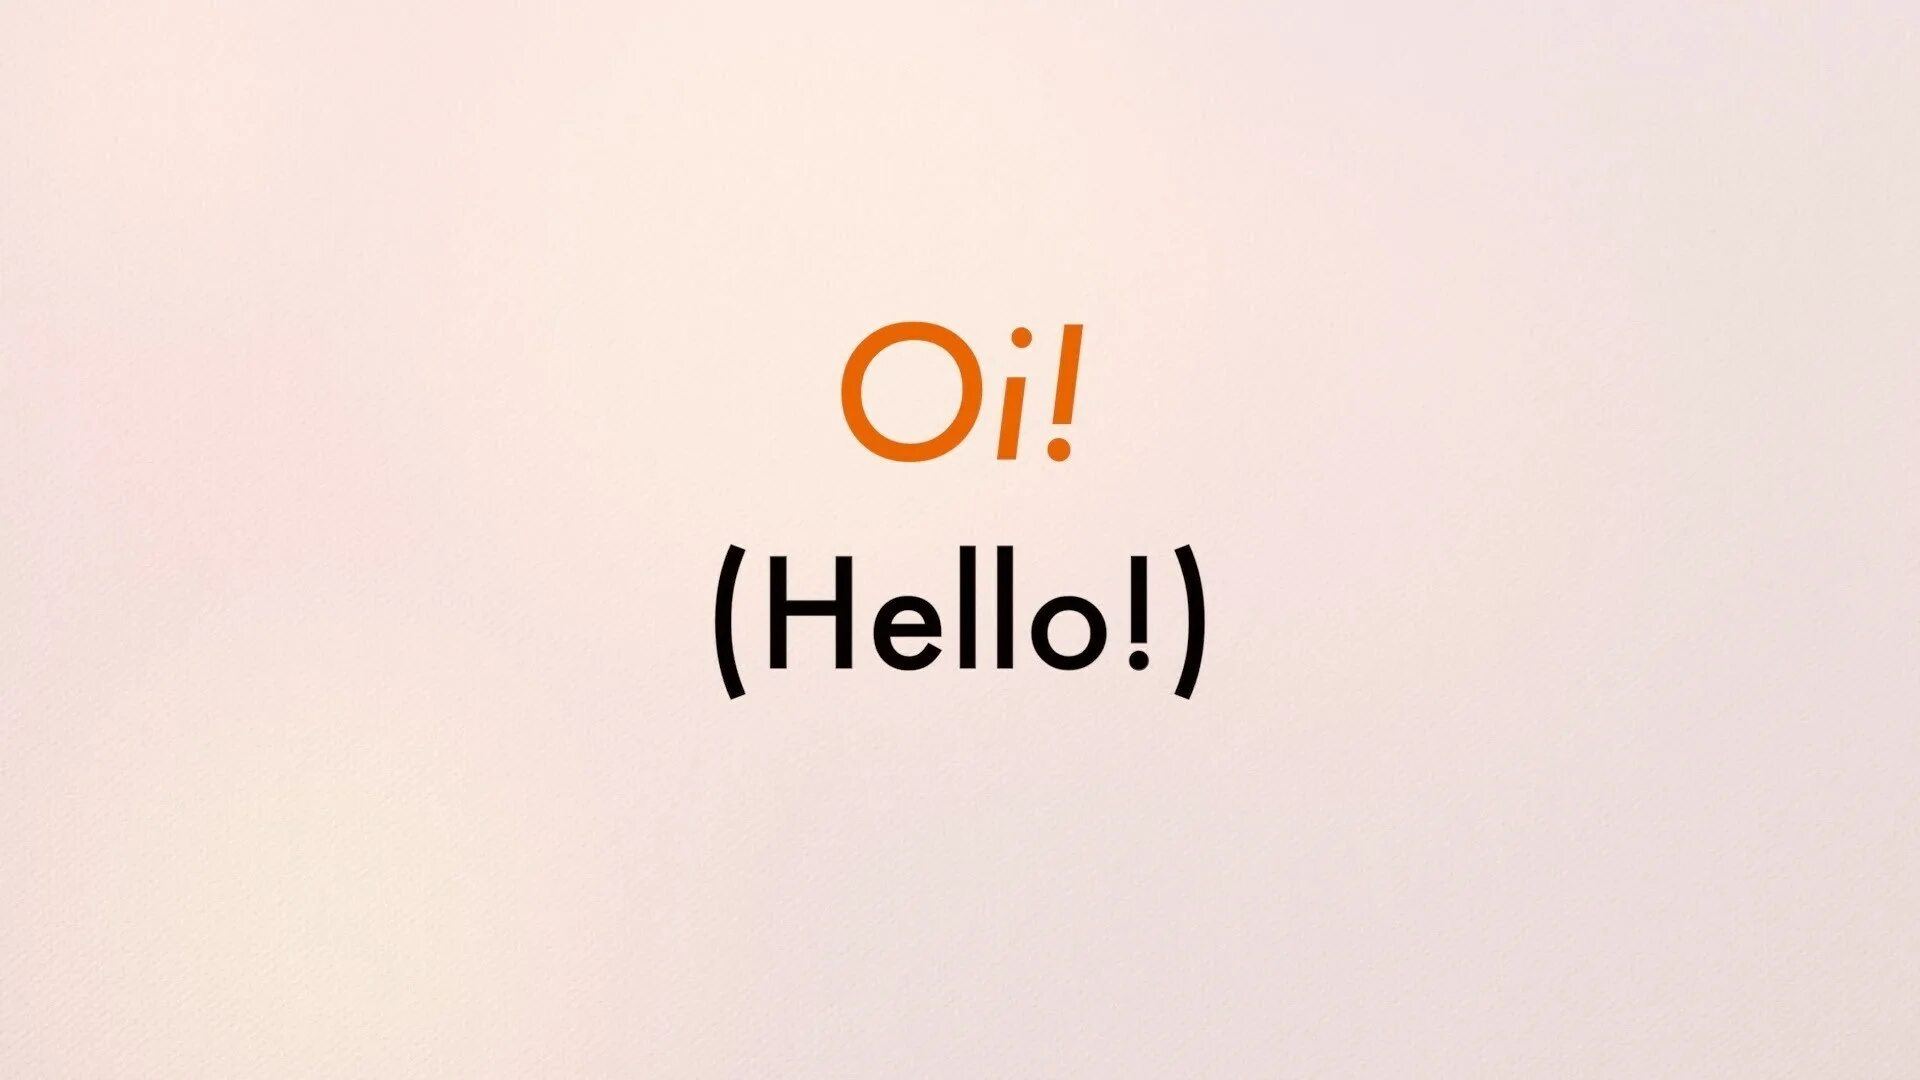 Хелло язык русский. Portuguese hello. Say hello. Saying hello. Hello Welcome to Brazil in Portuguese.